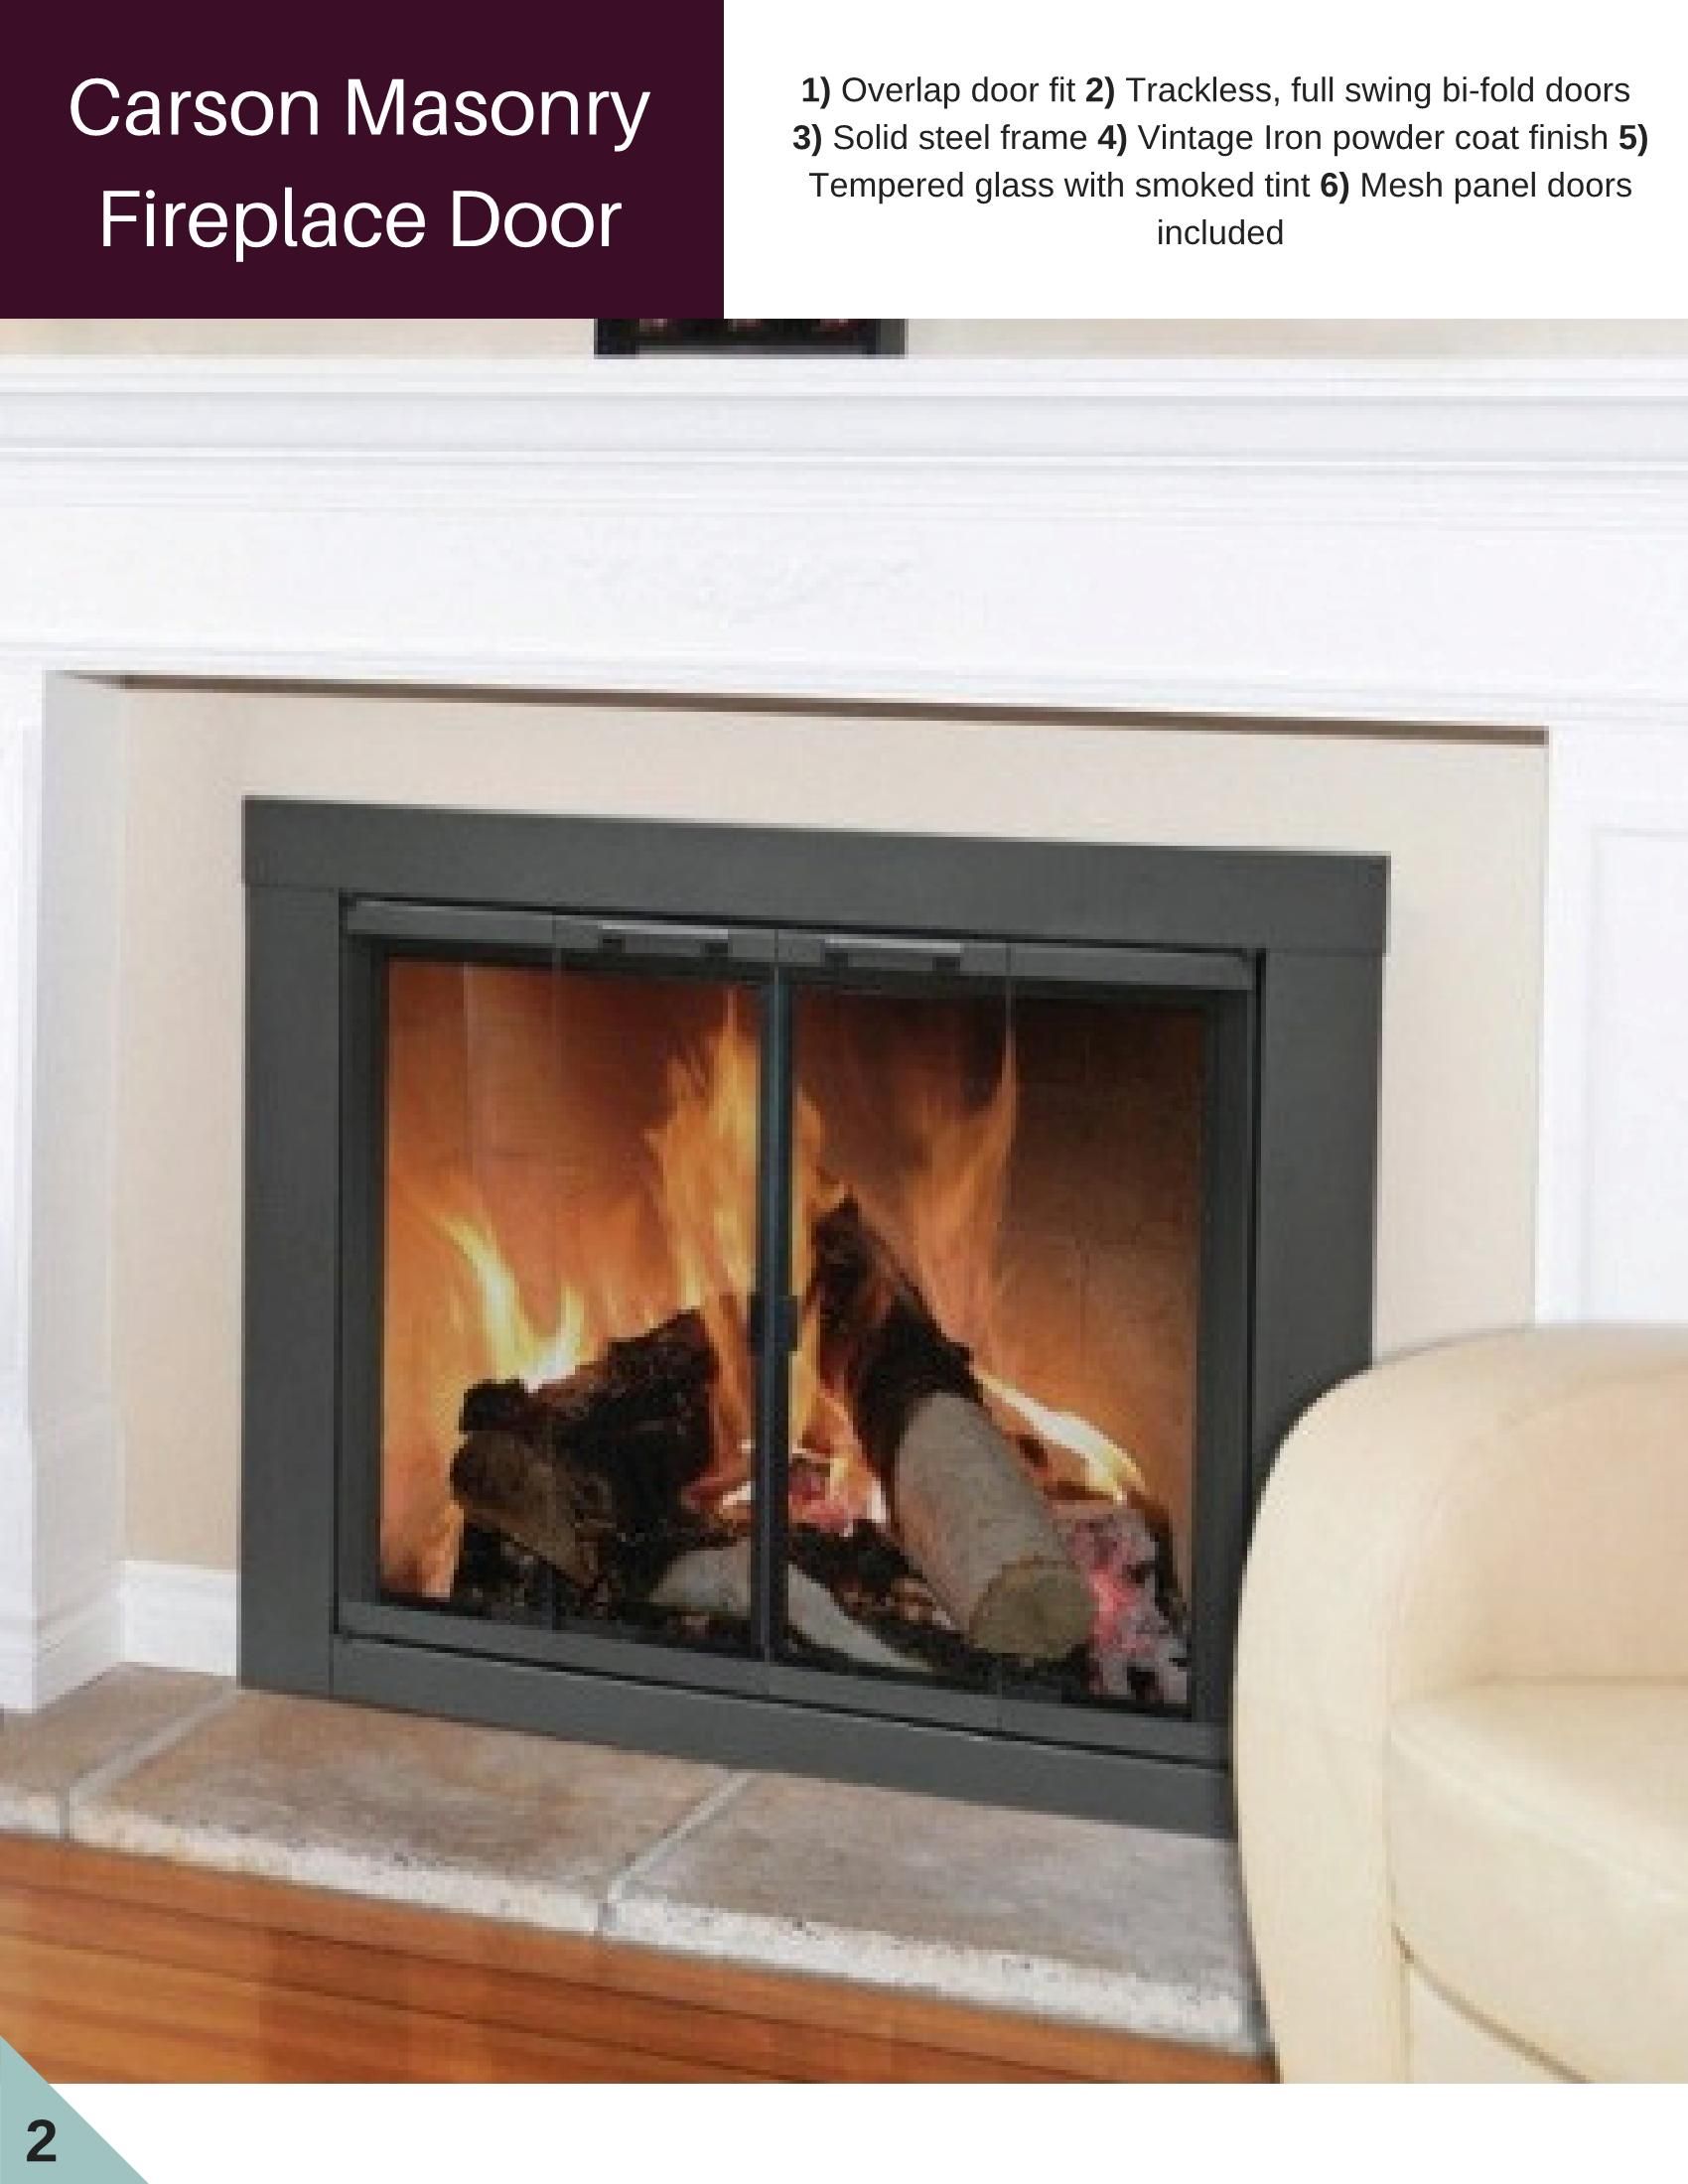 Fireplace Bellow Lovely Fireplace Doors 2018 Catalog Nov 19 Flip Book Pages 1 20